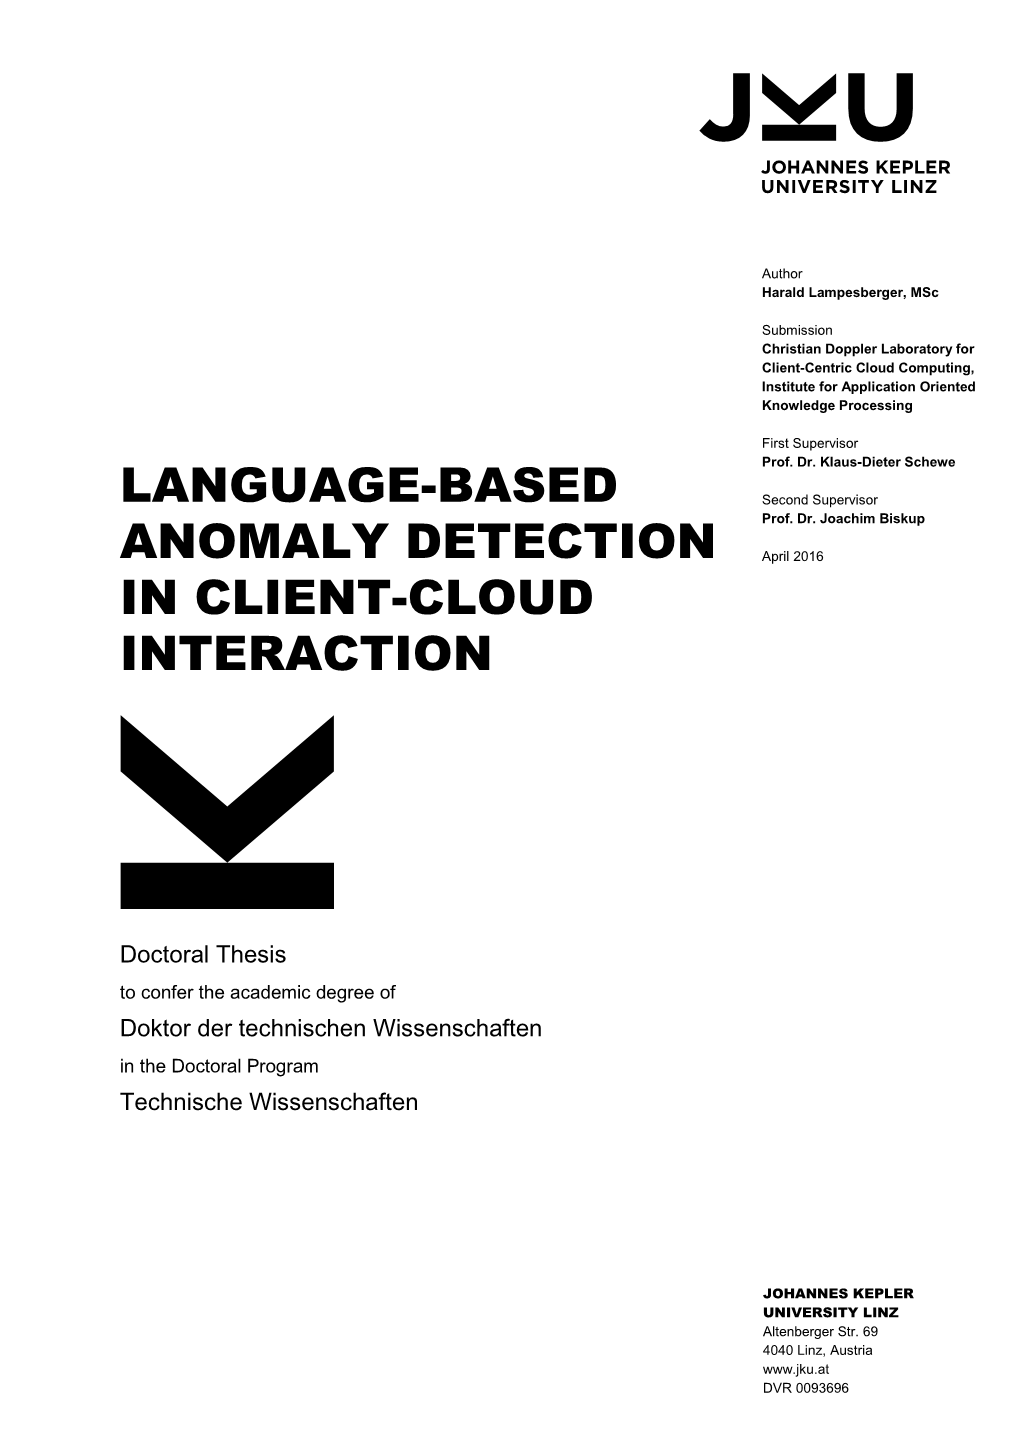 Language-Based Anomaly Detection in Client-Cloud Interaction